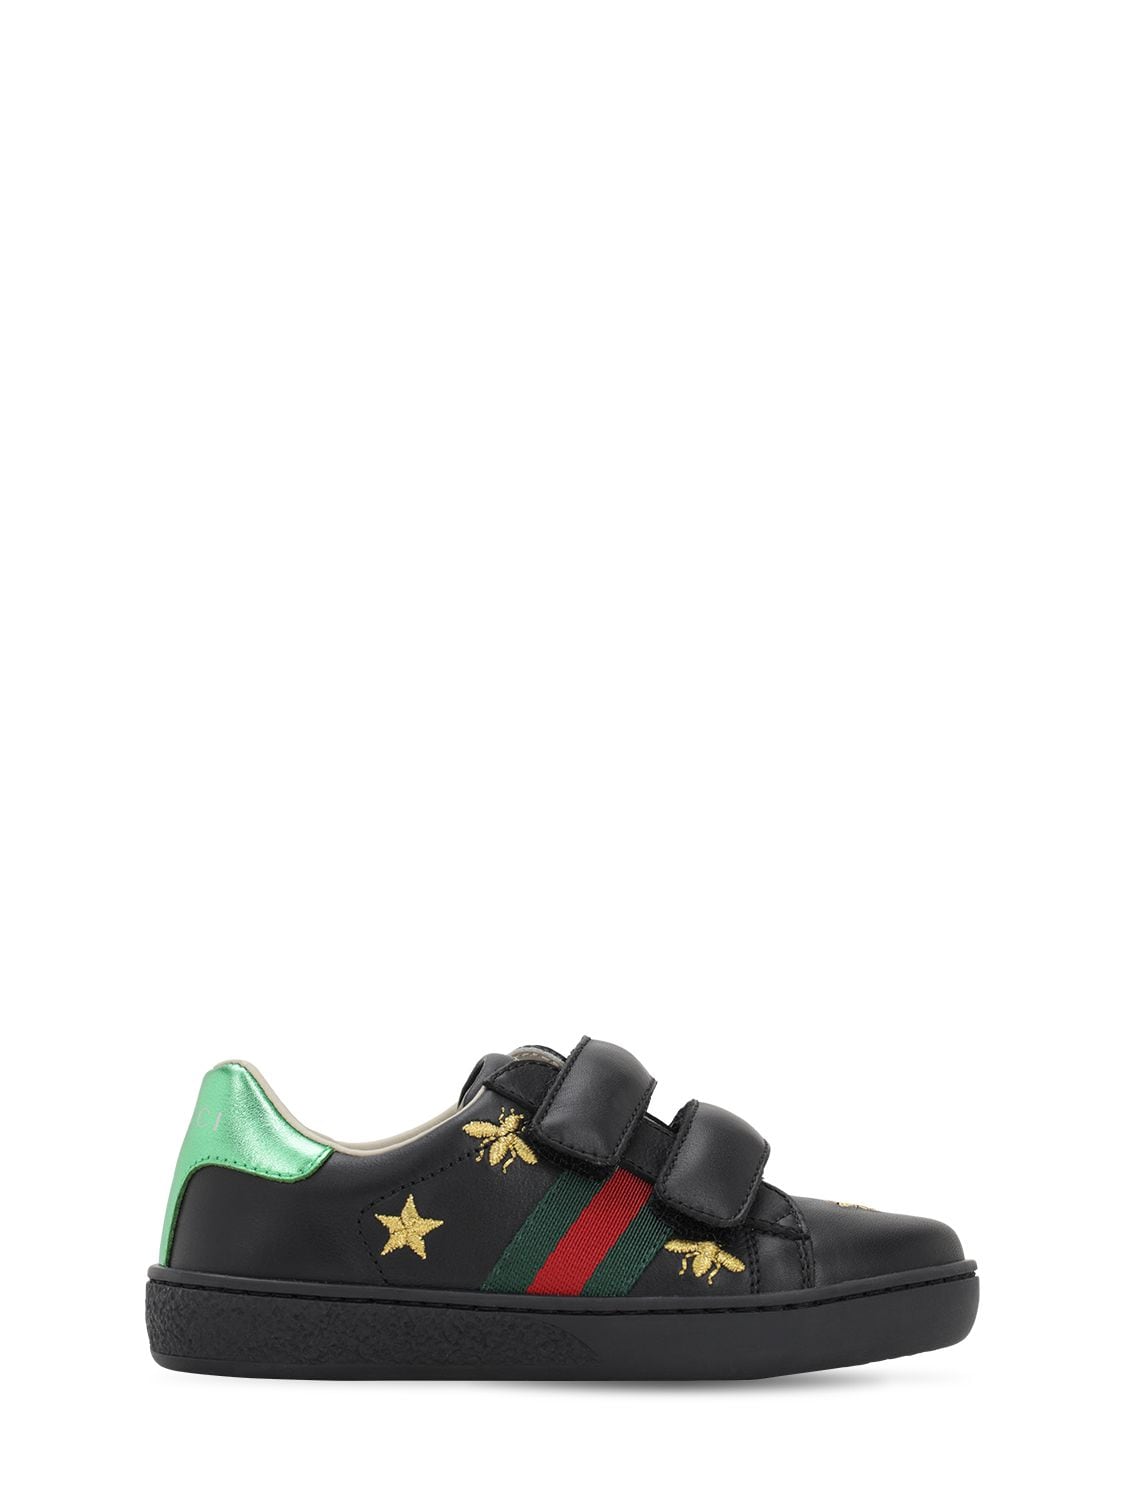 Gucci Kids' Embroidered Leather Strap Sneakers In Black